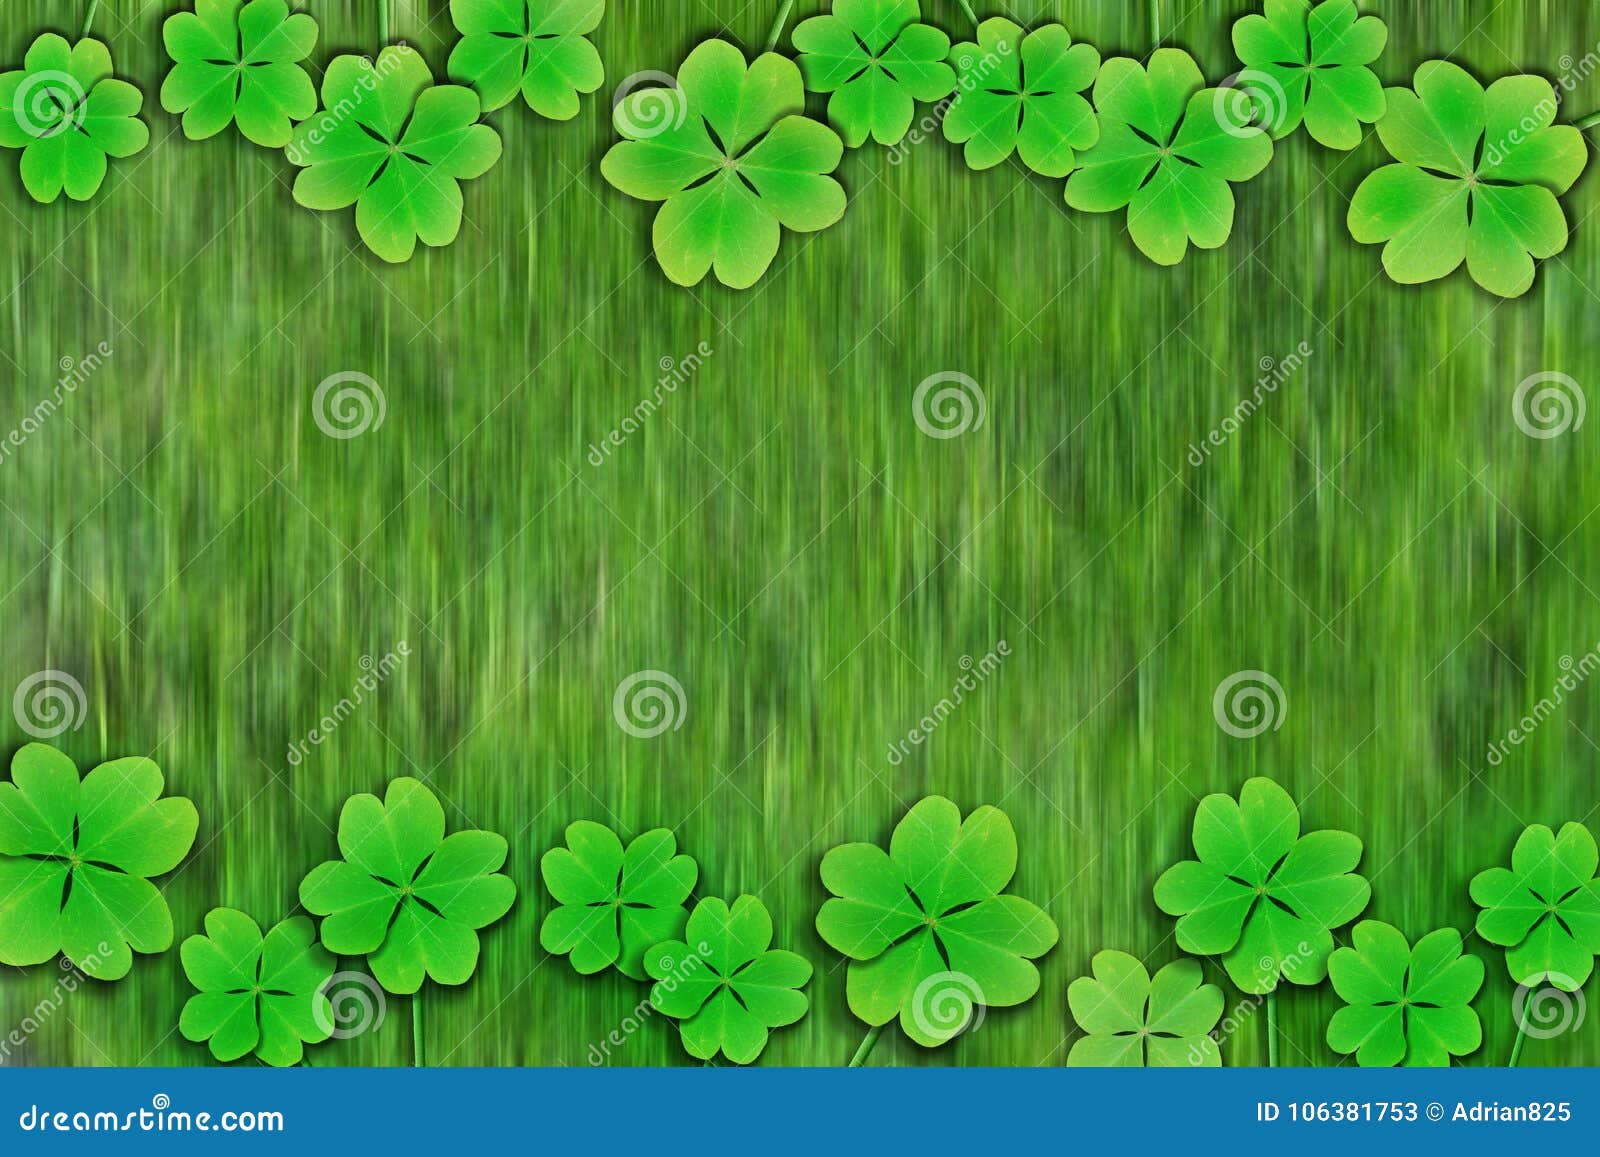 Lucky Four Leaf Clover Natural Background Stock Image - Image of